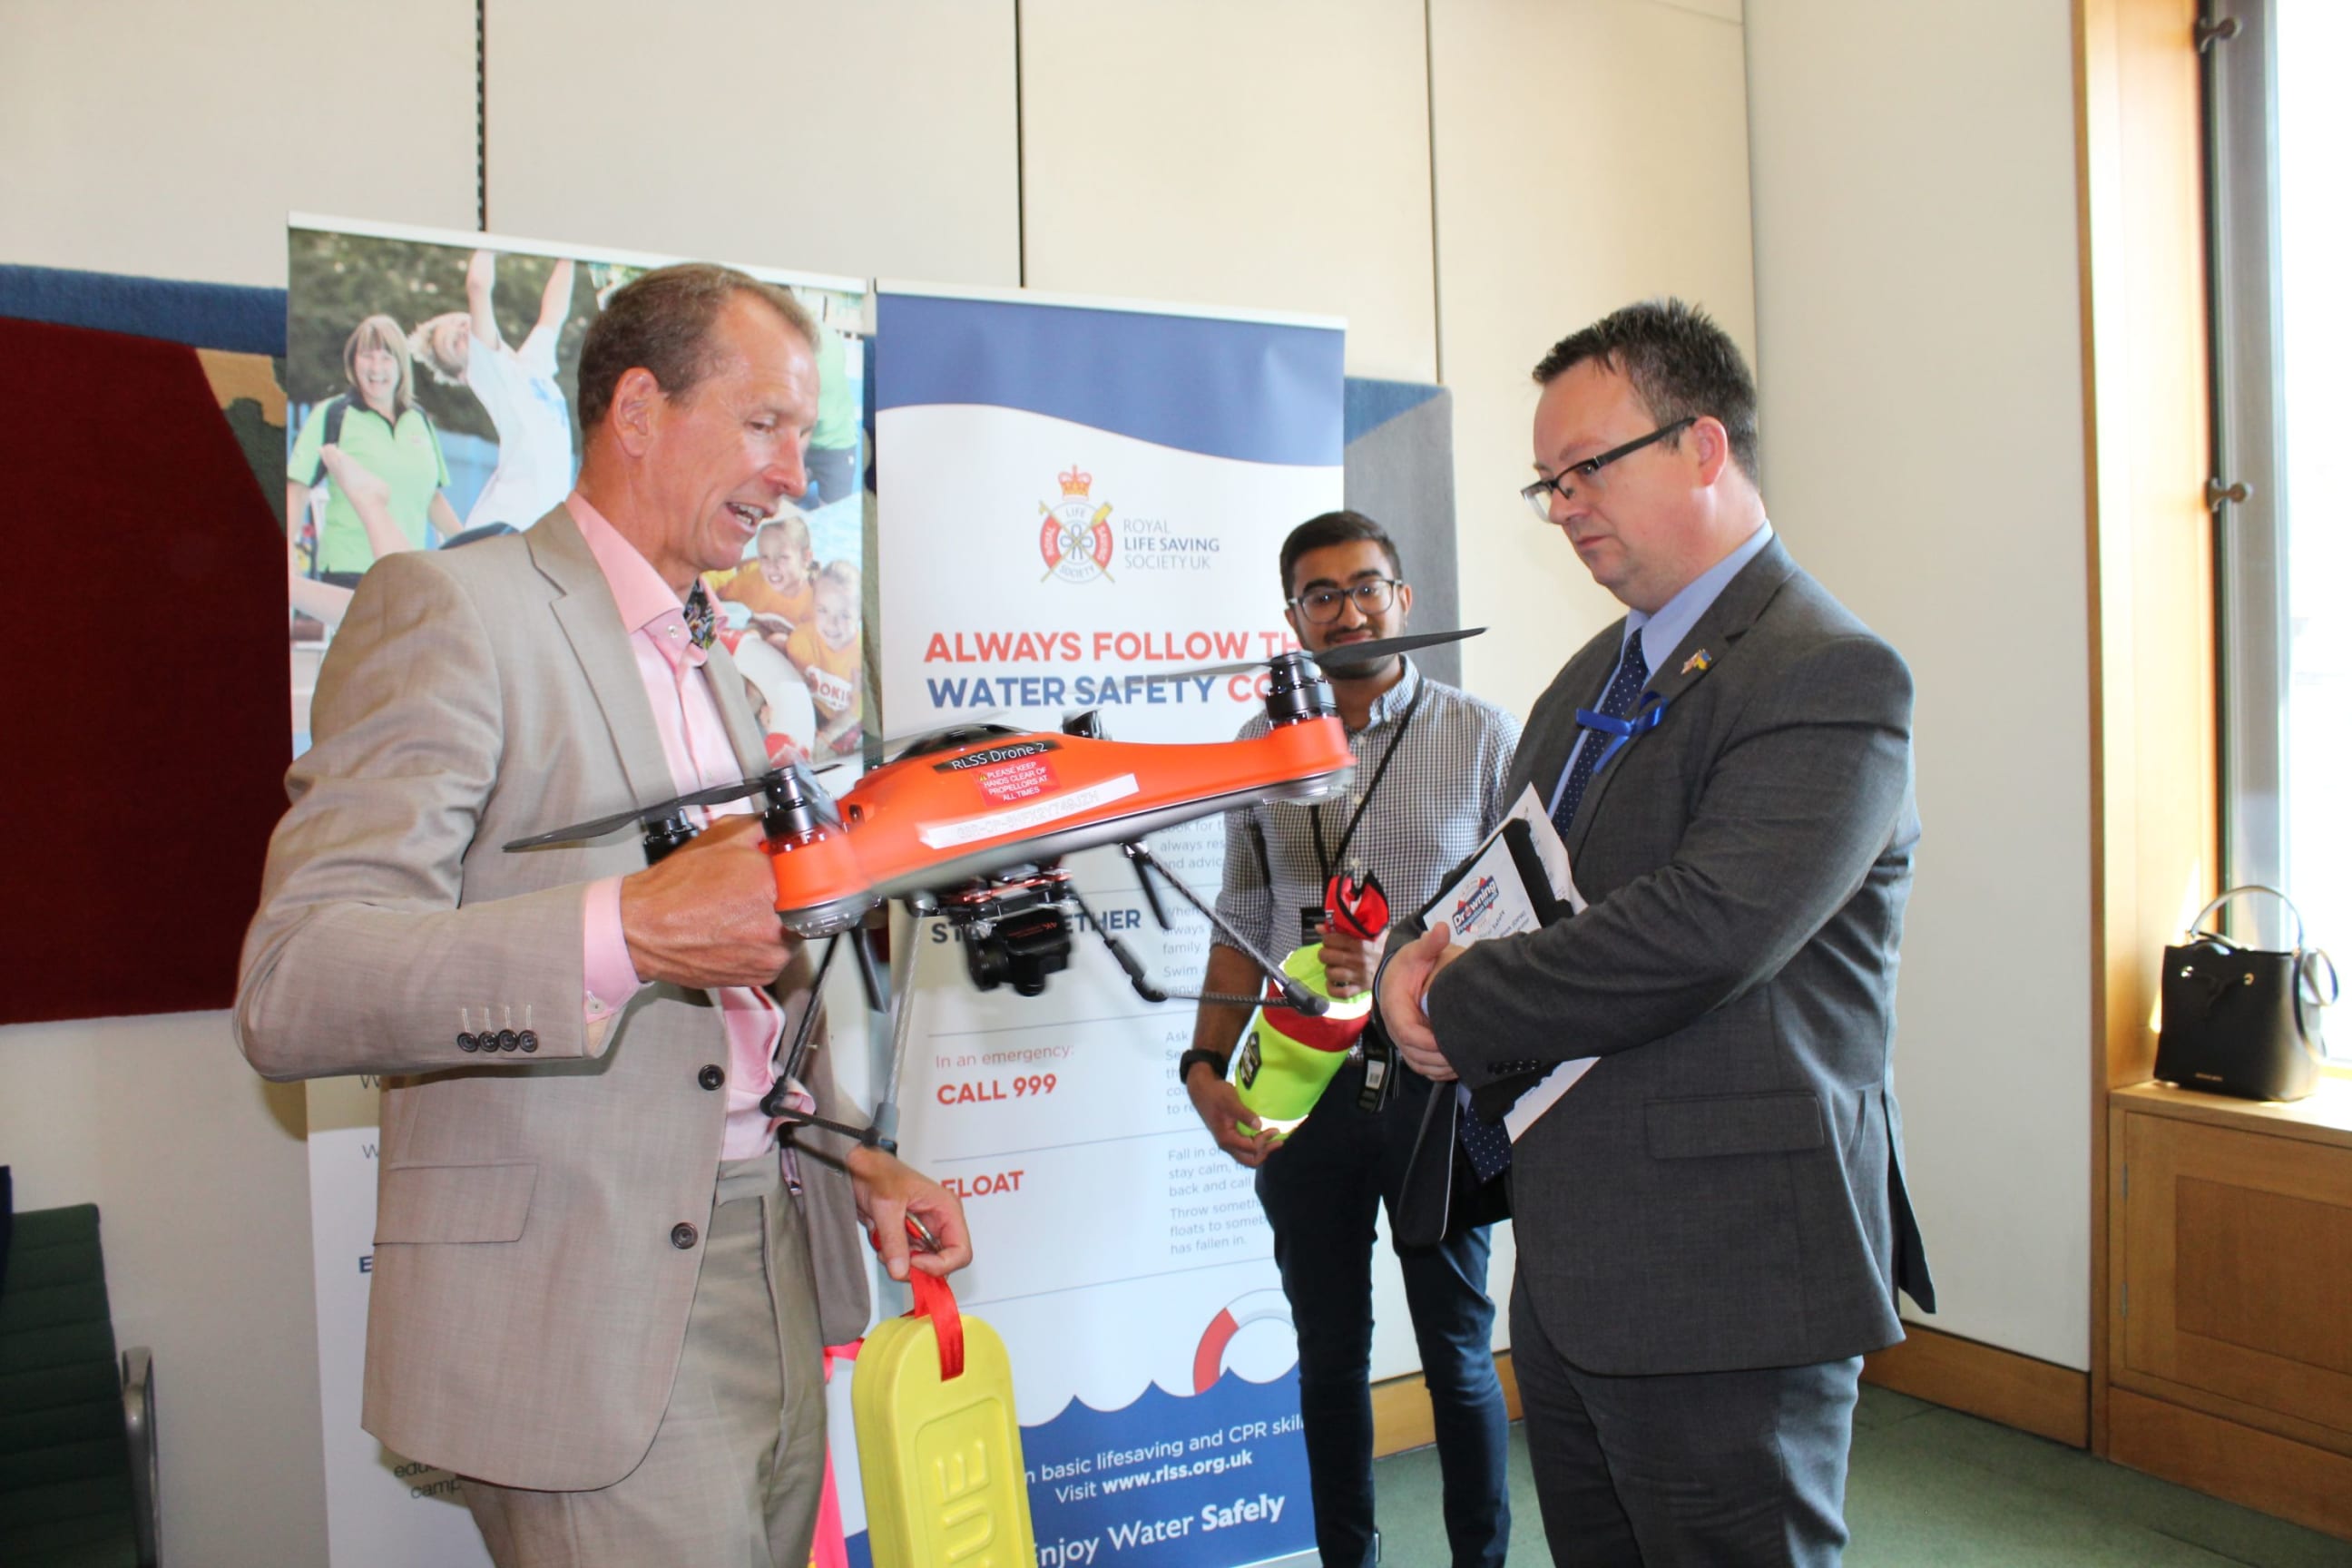 Greg Whyte demonstrates drone at Westminster